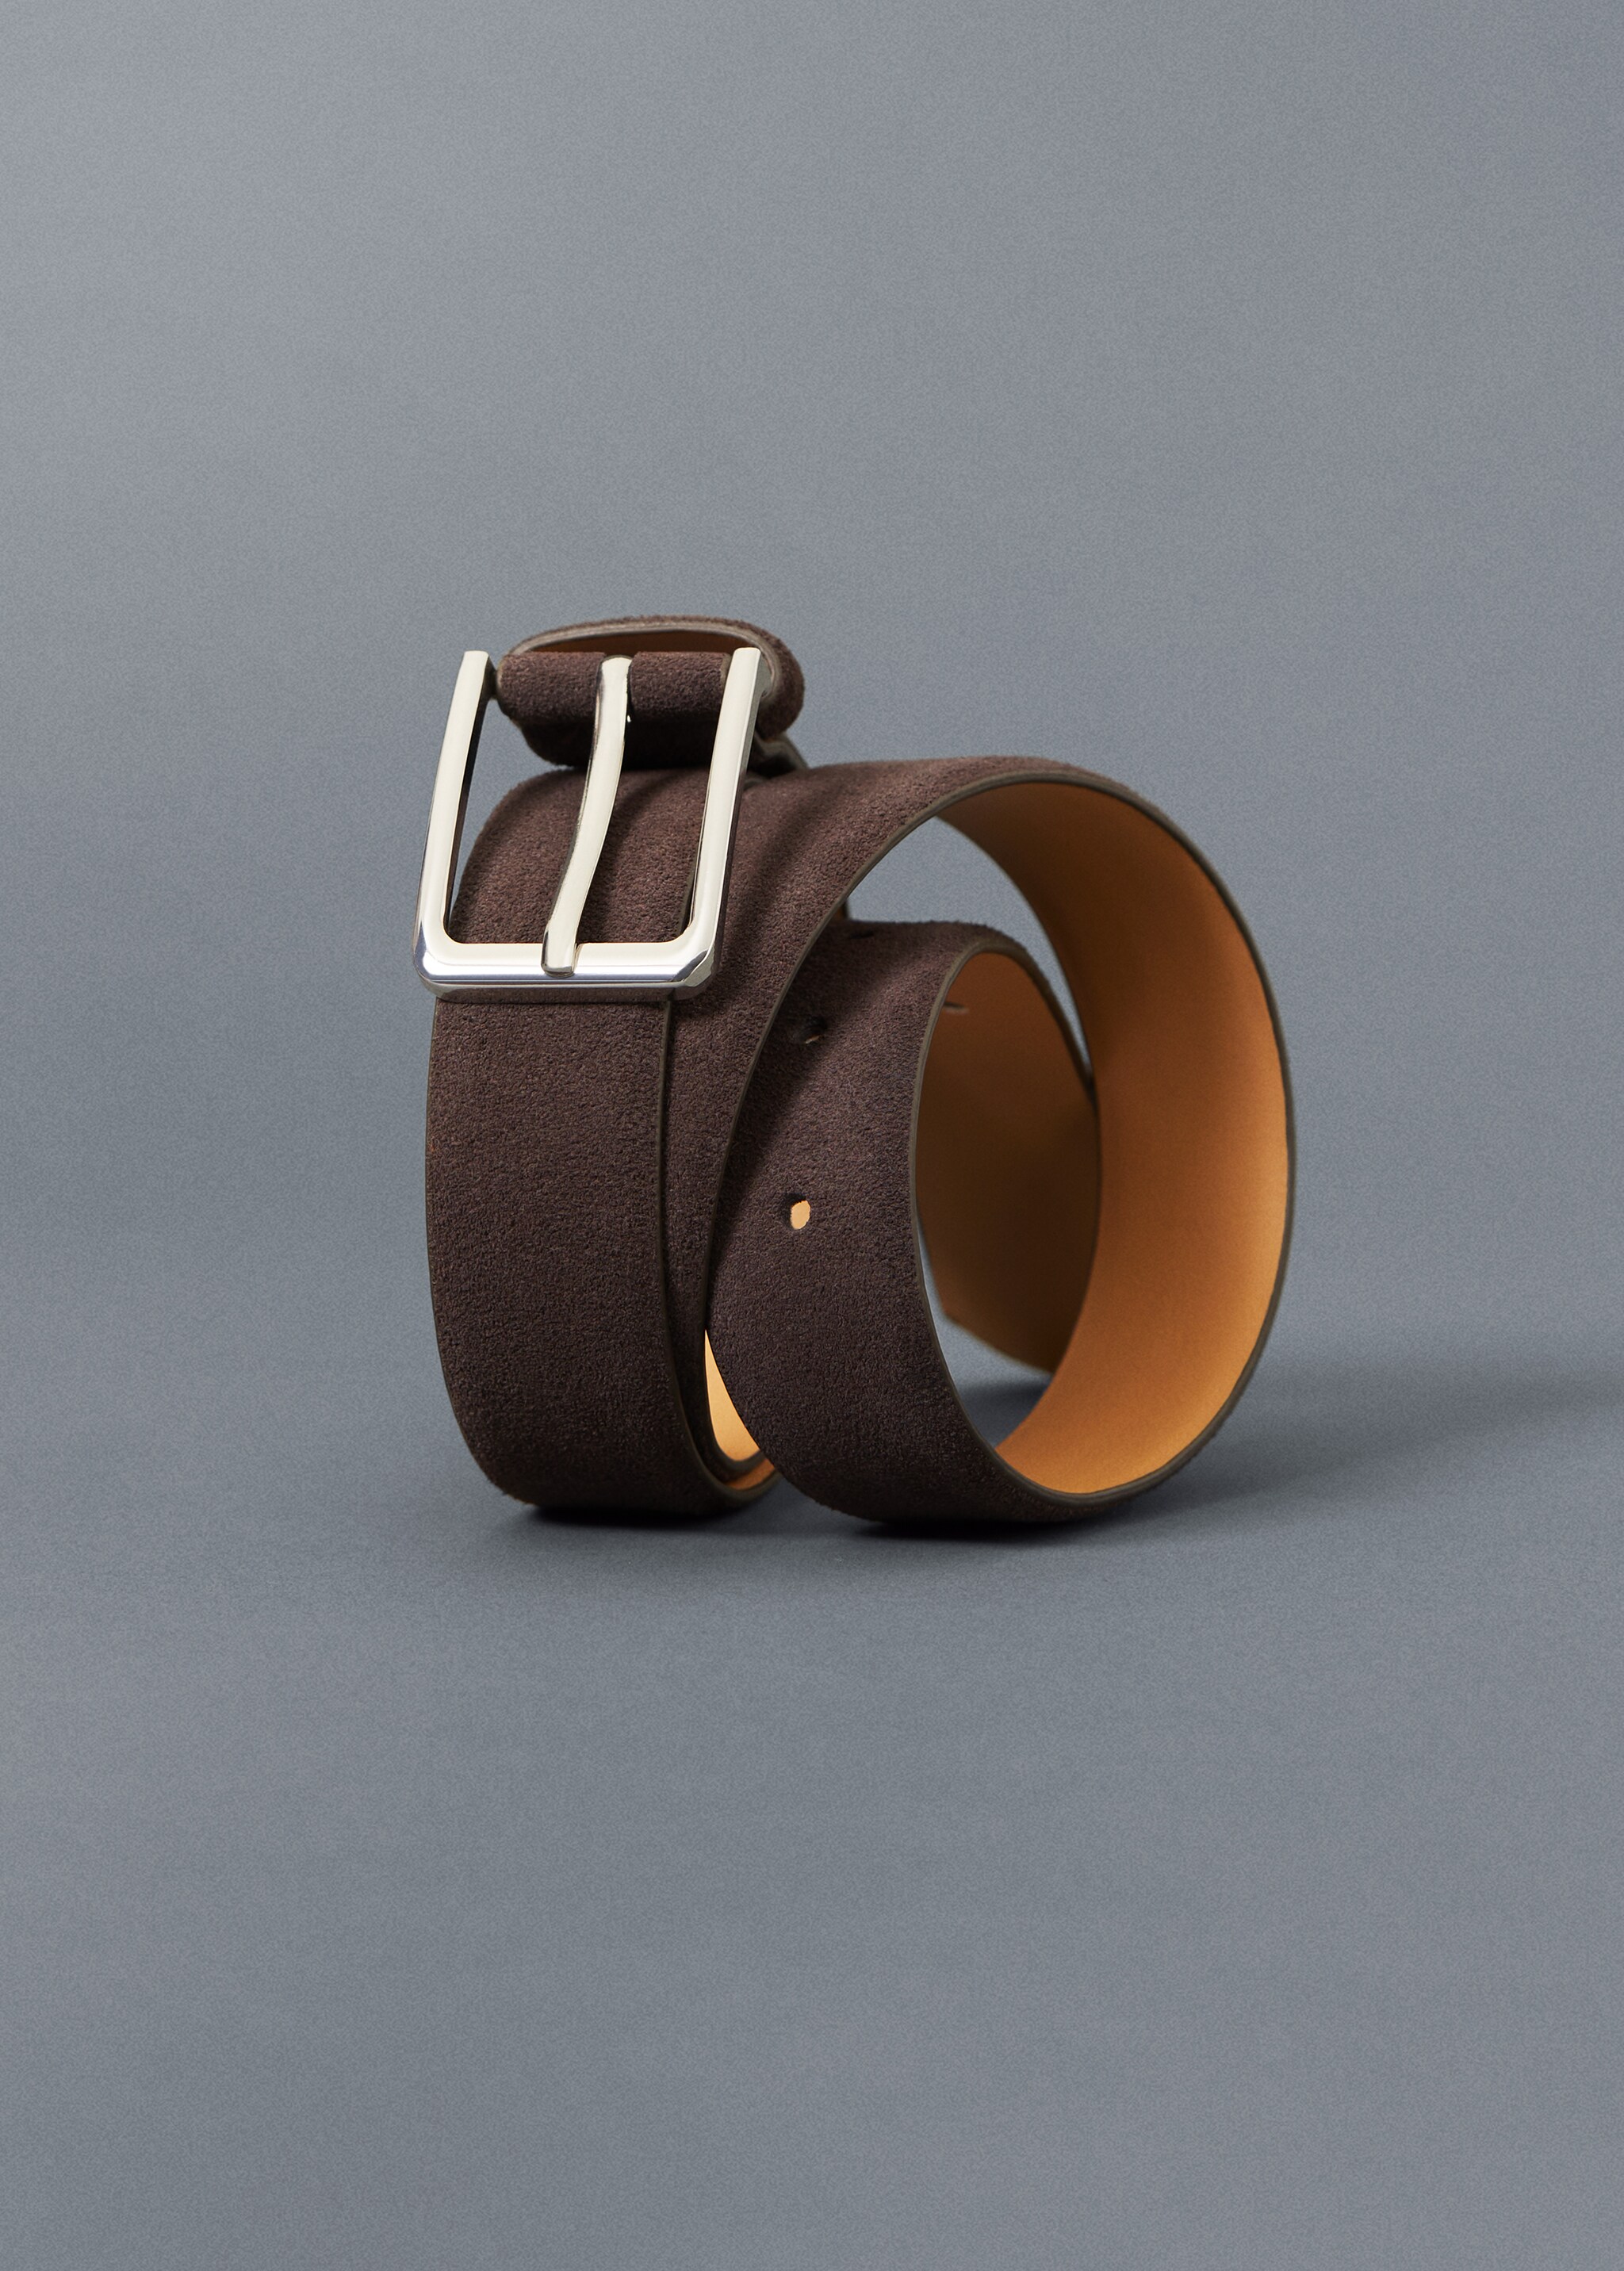 Suede belt - Details of the article 4